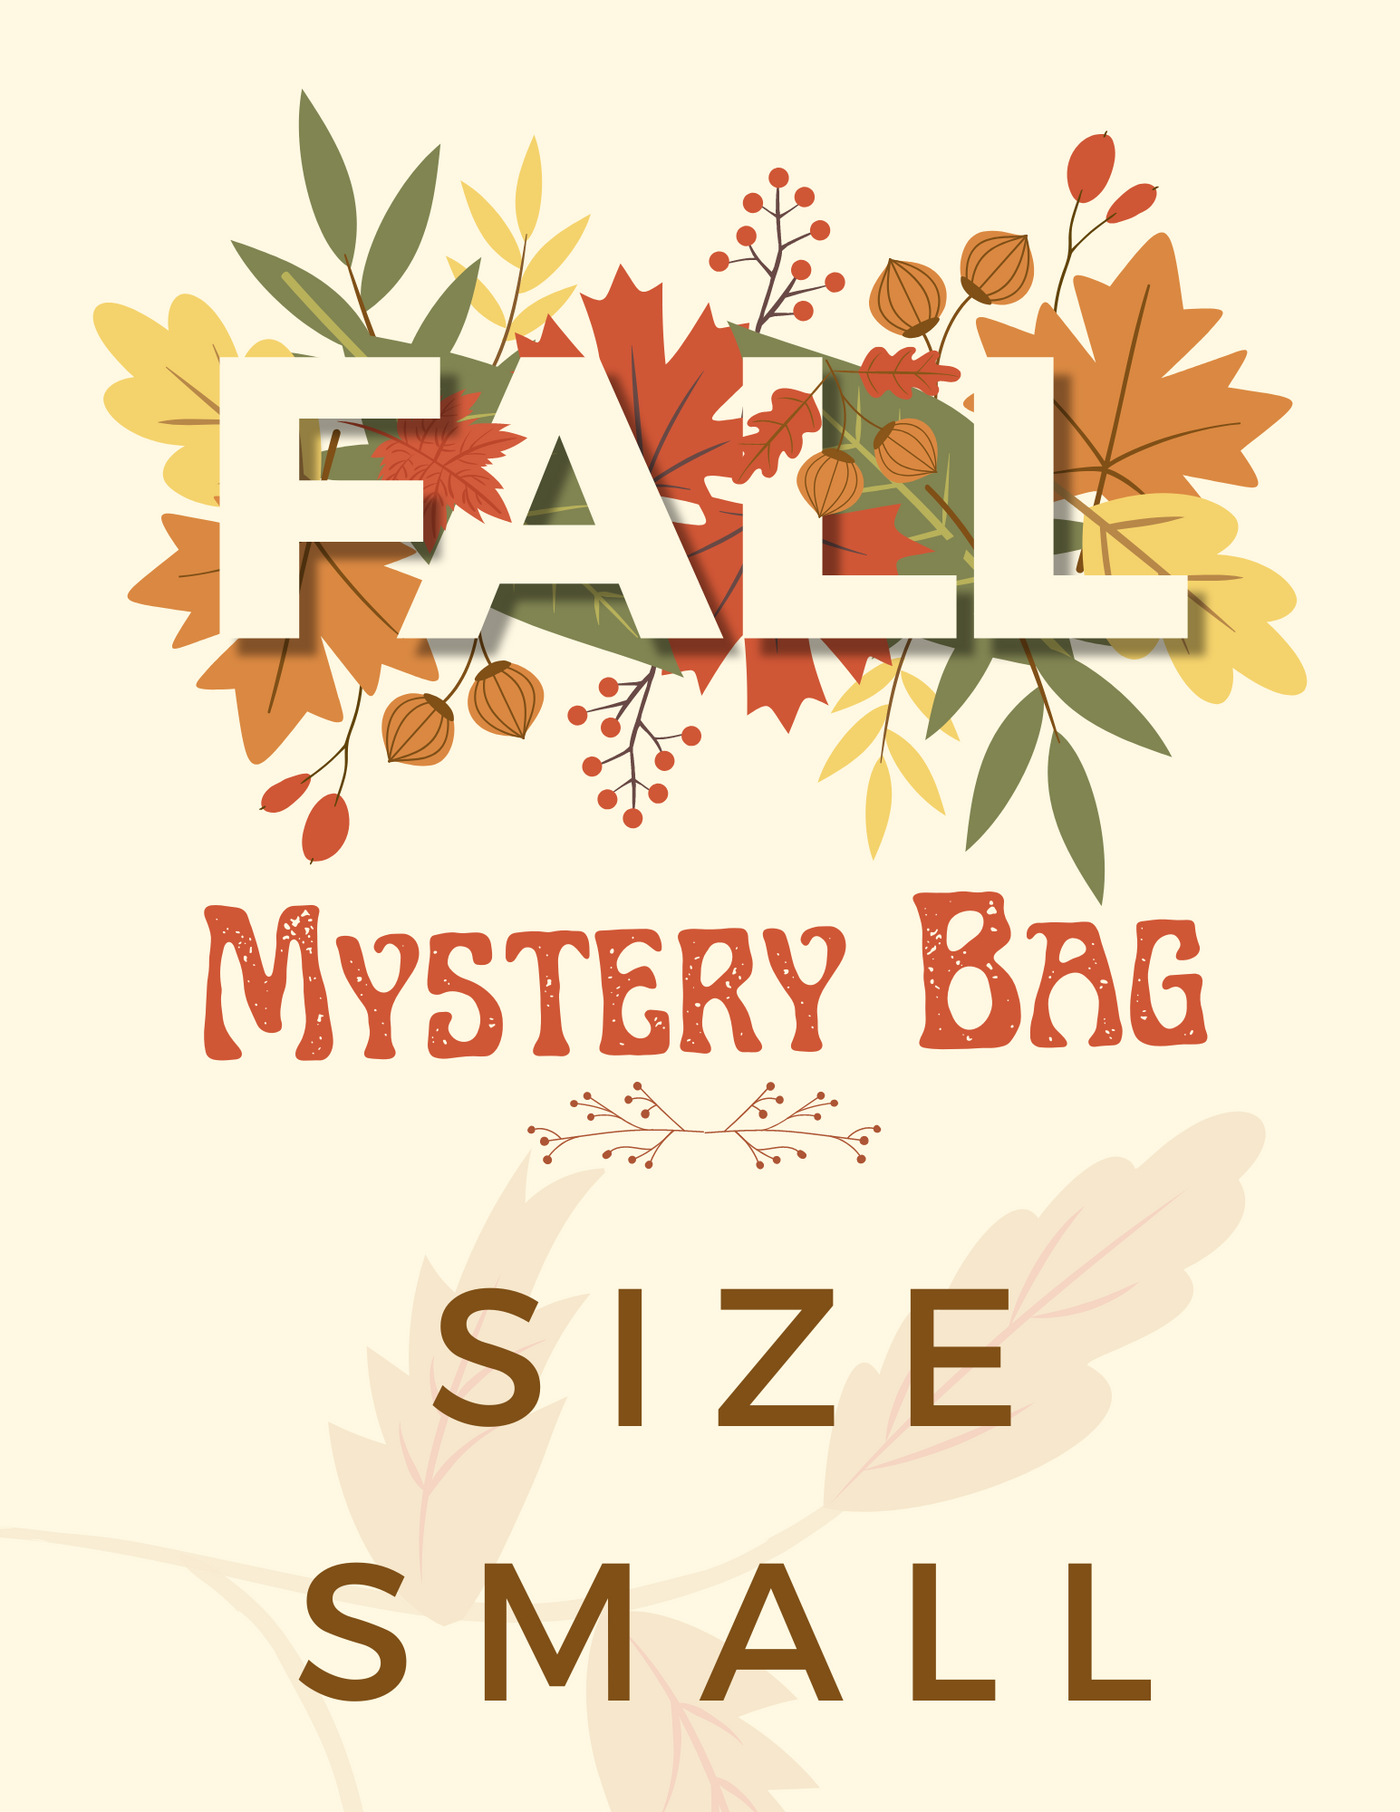 SMALL - Mystery bag